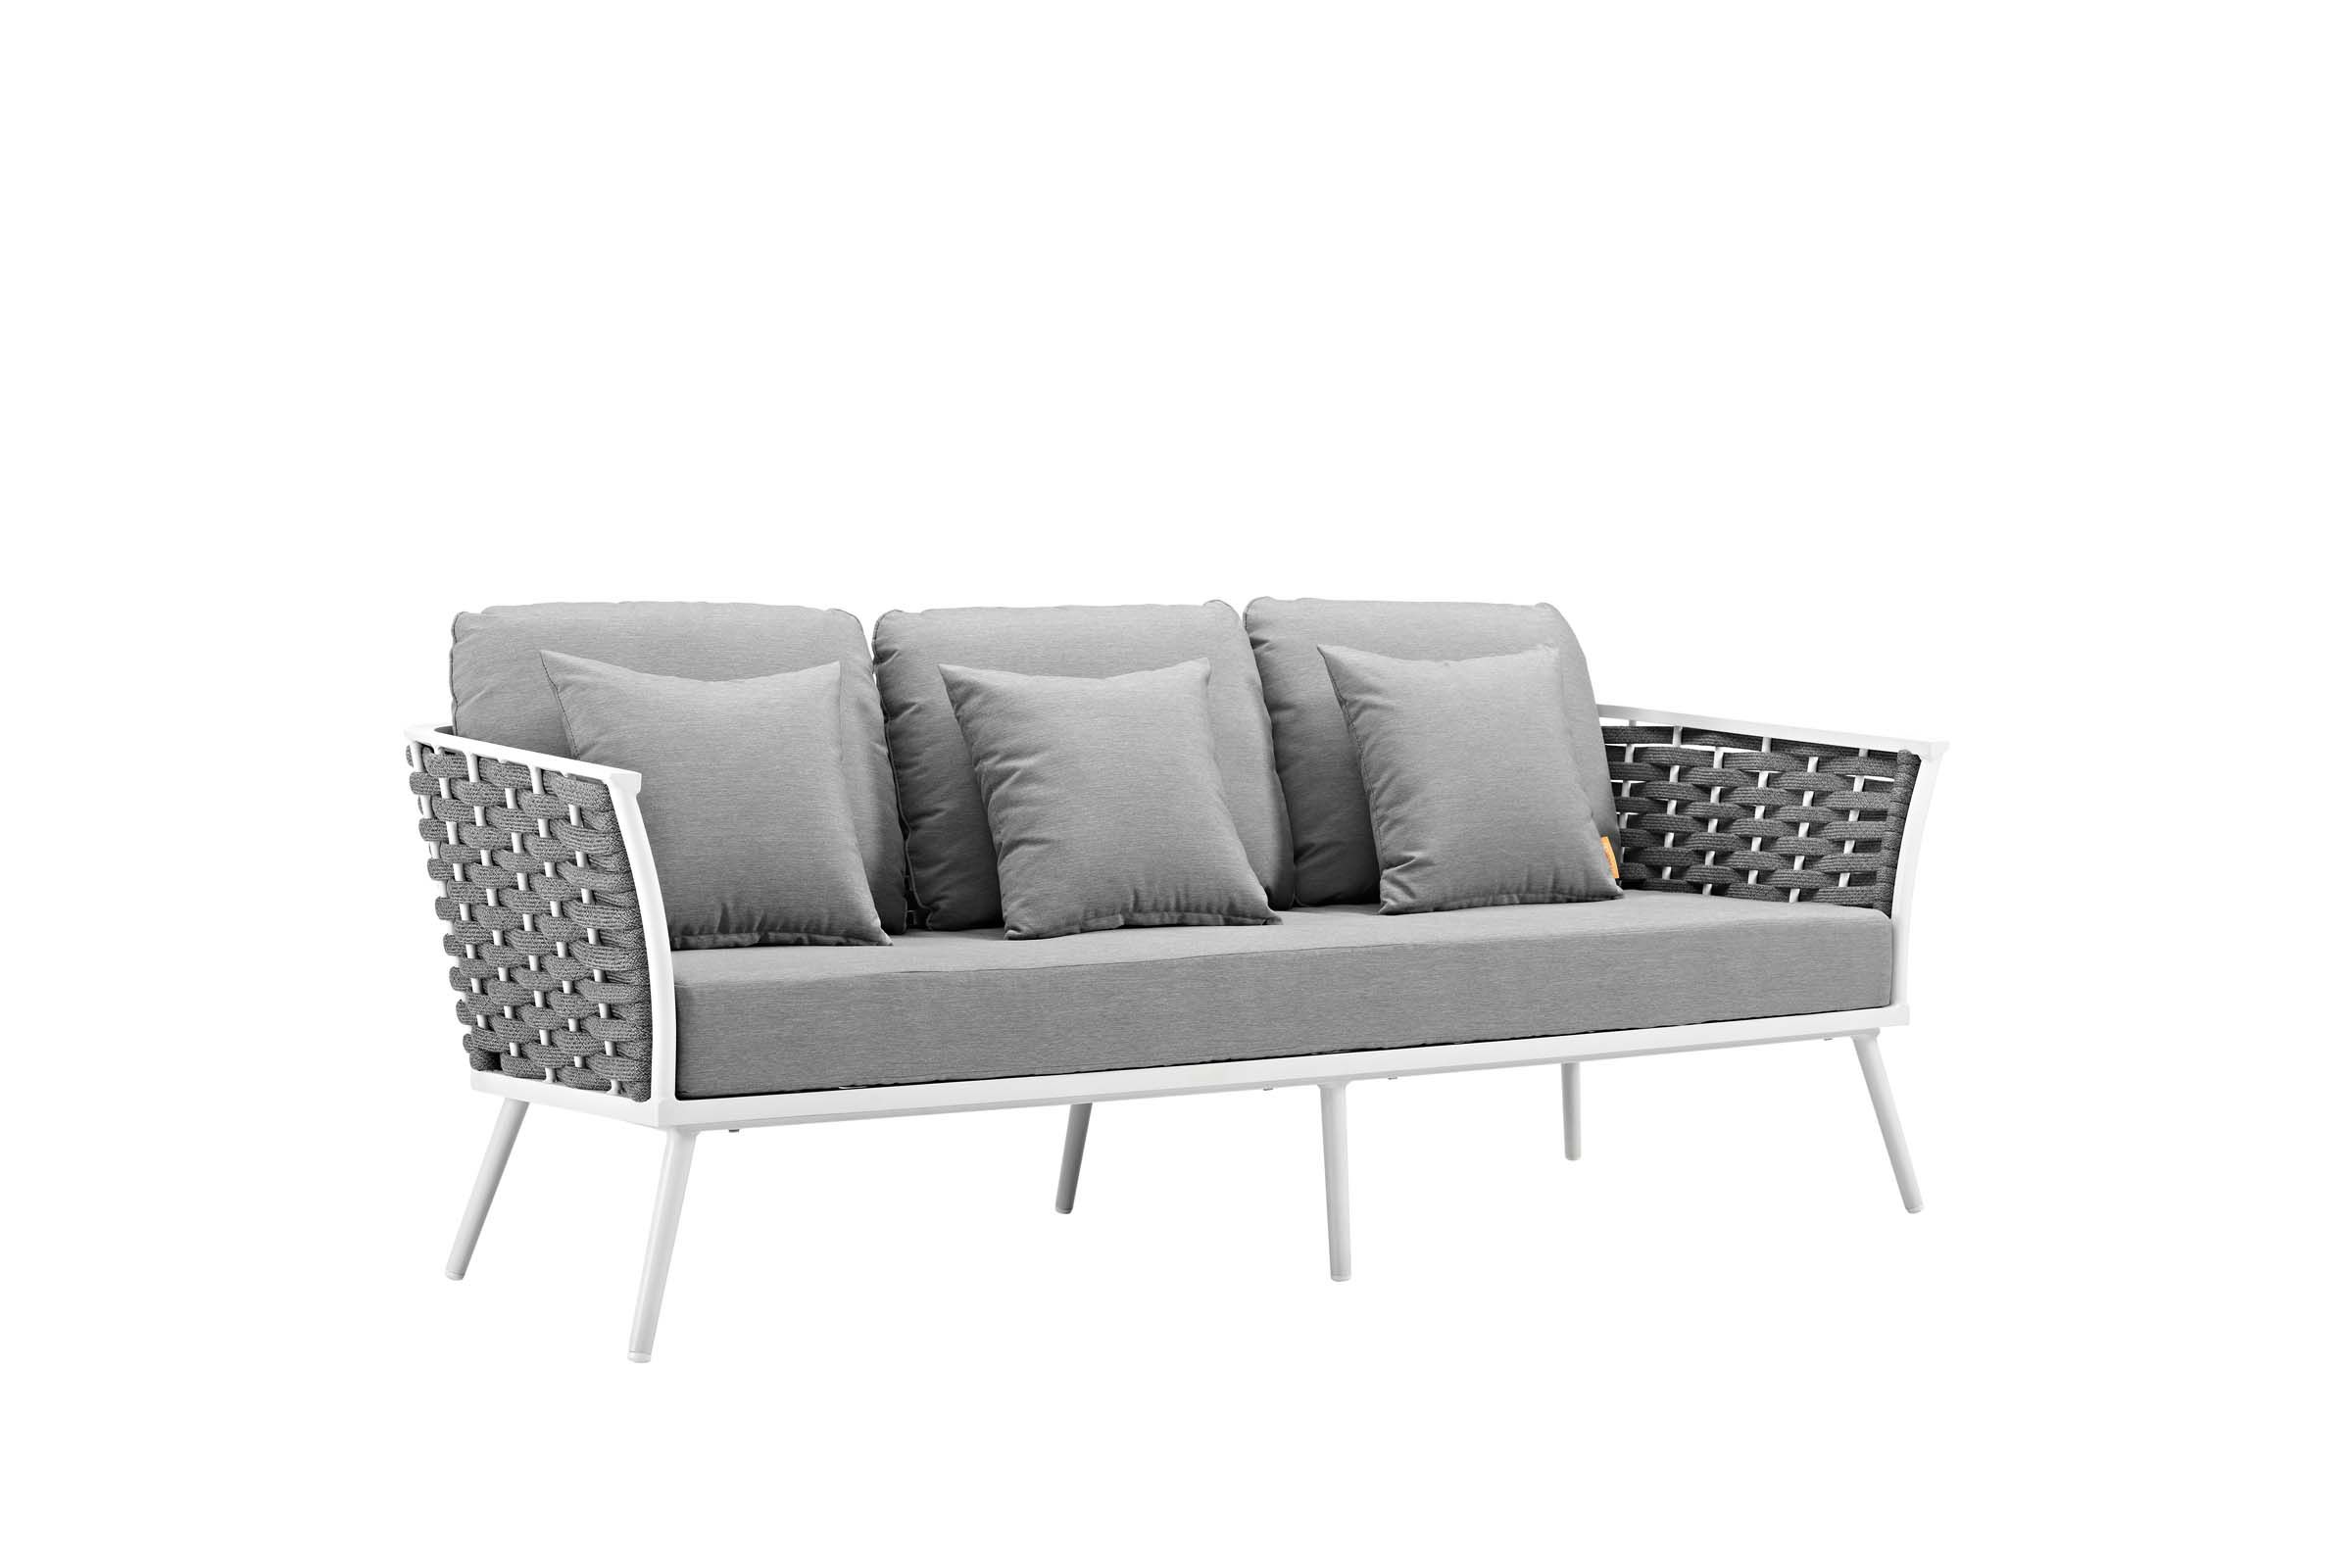 Stance Outdoor Patio Aluminum Sofa in White Gray